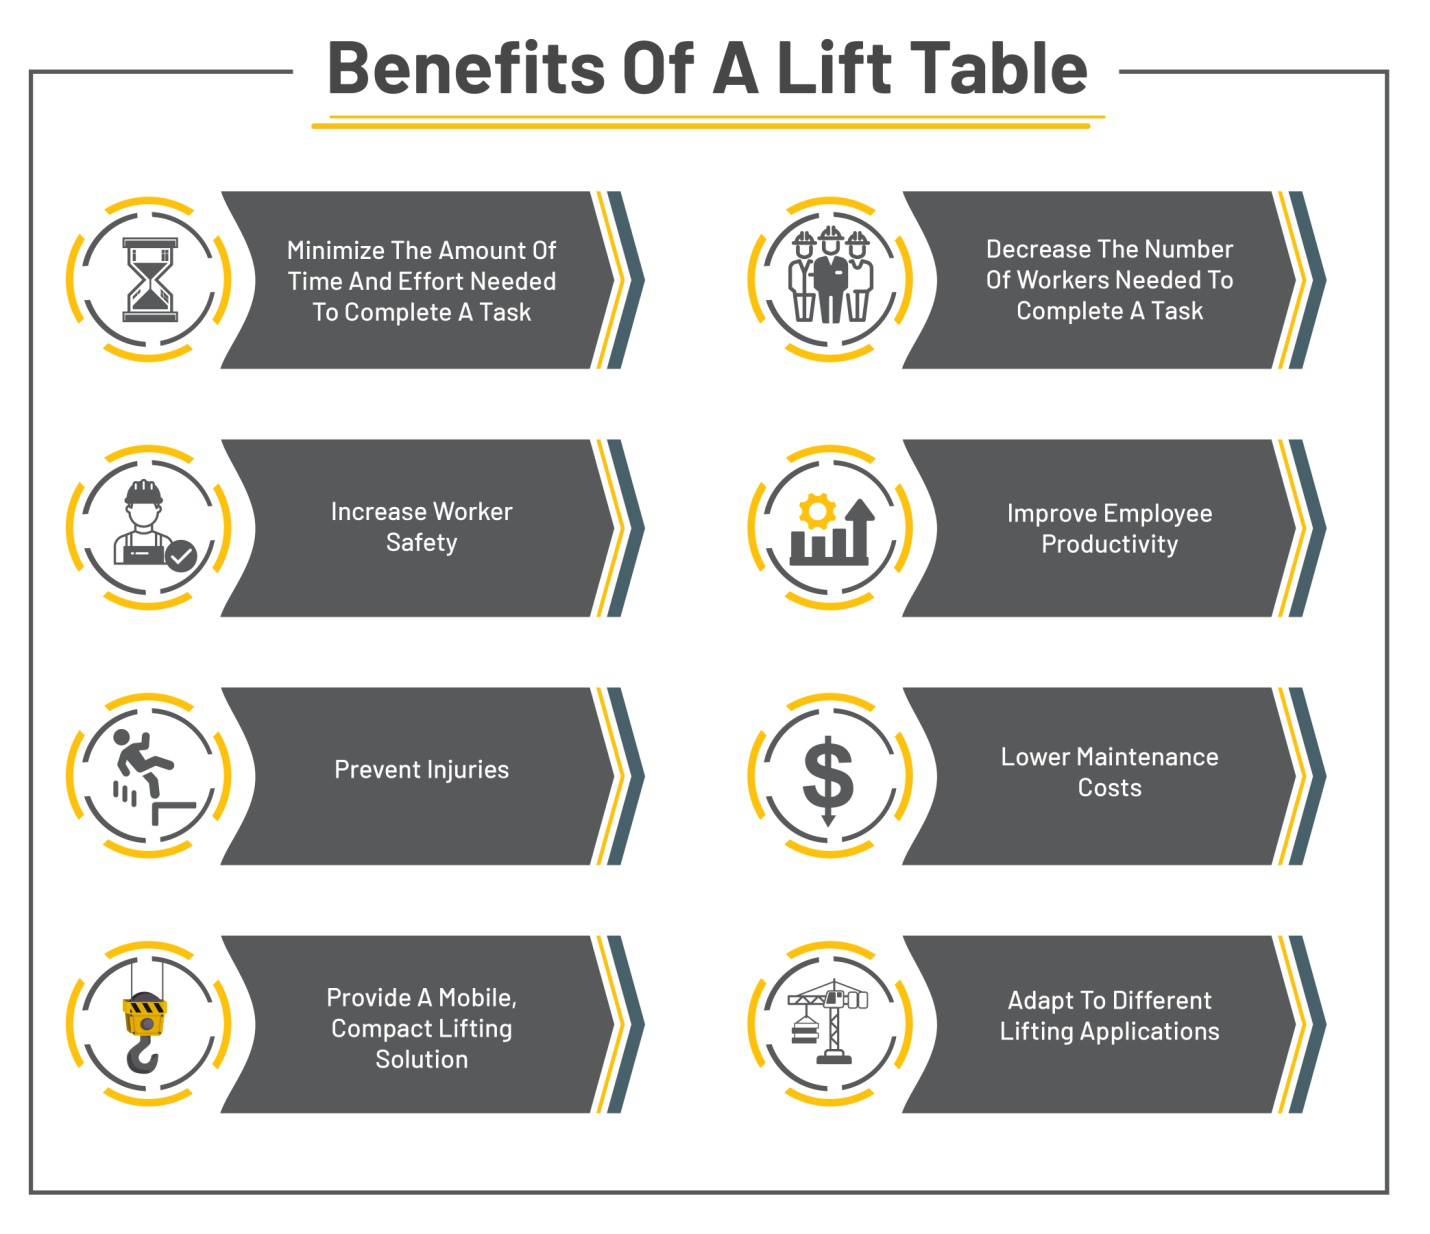 An infographic stating the benefits of a lift table